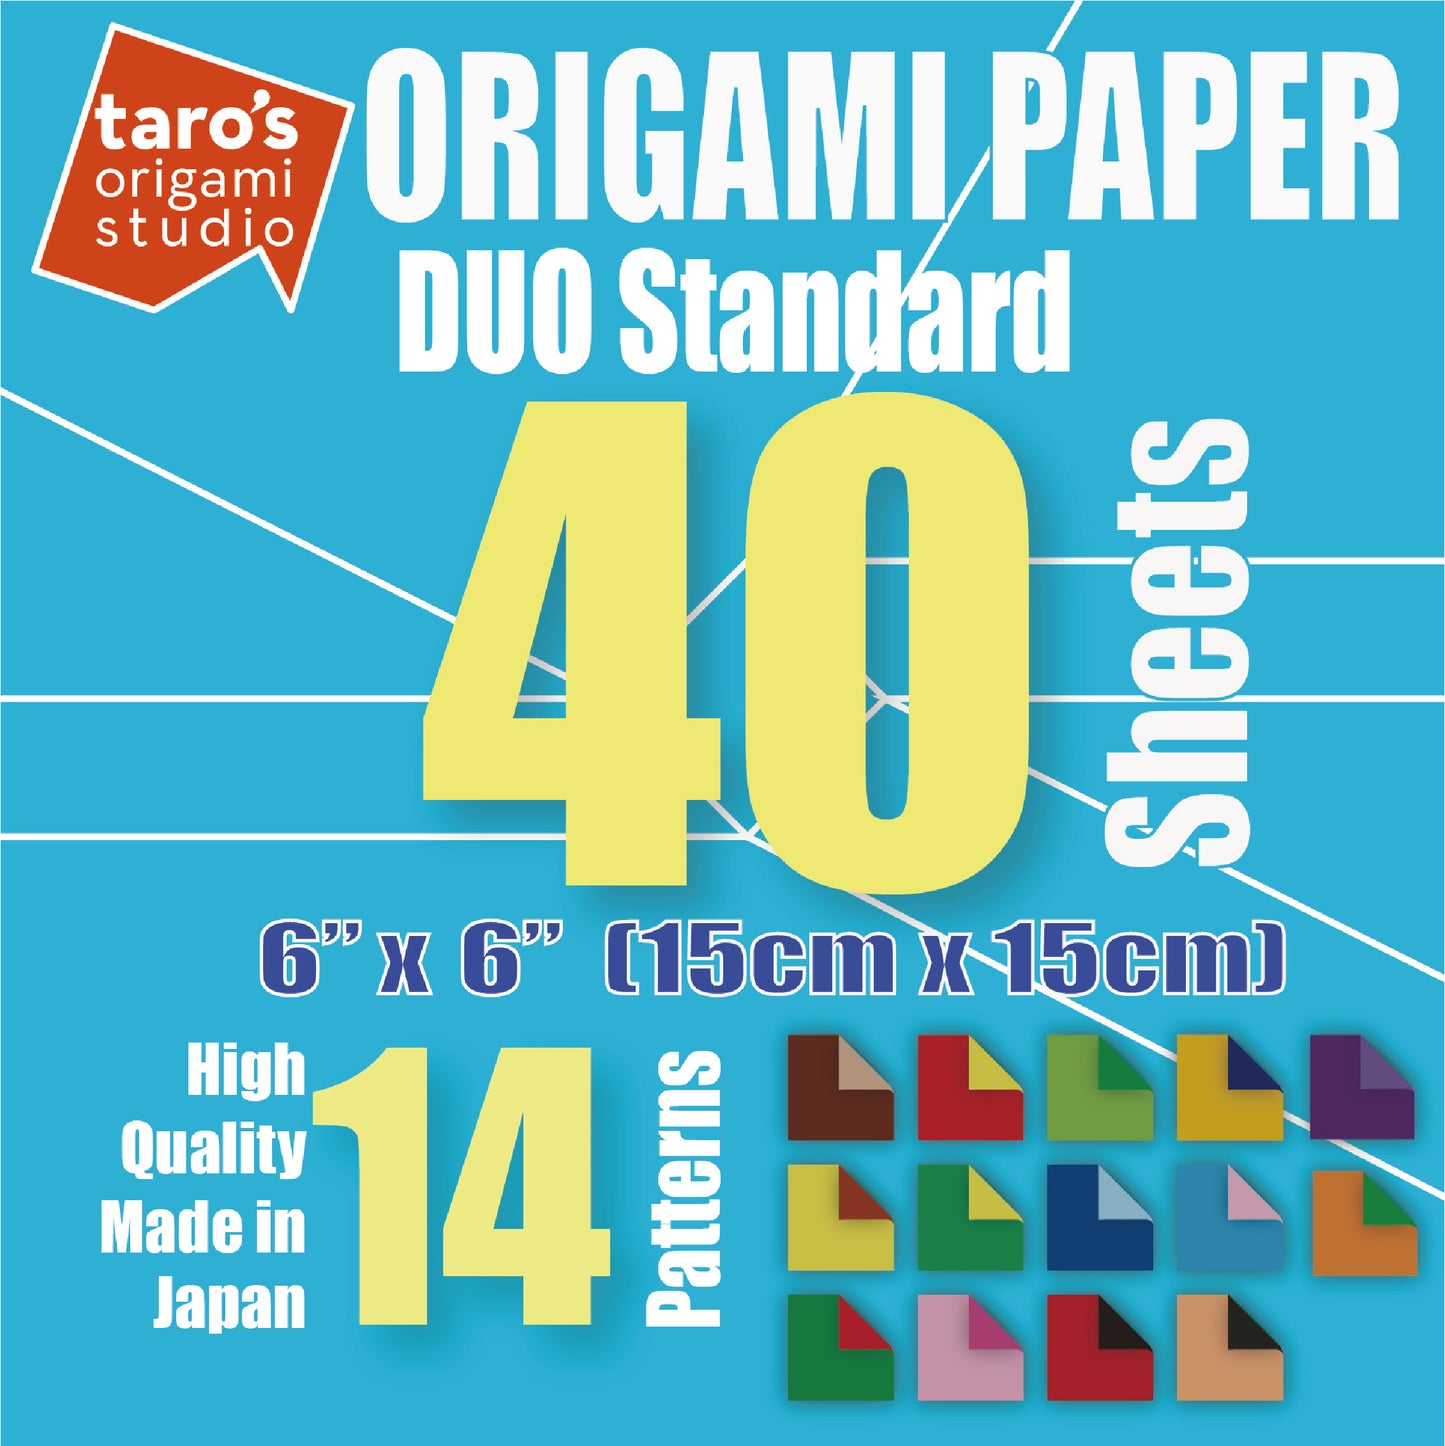 [Taro's Origami Studio] Duo (Diffrent Colors On Each Side) Double Sided Standard 6 Inch (15 cm) Kami Paper with 14 Color Change Patterns, 40 Sheets (Made in Japan)